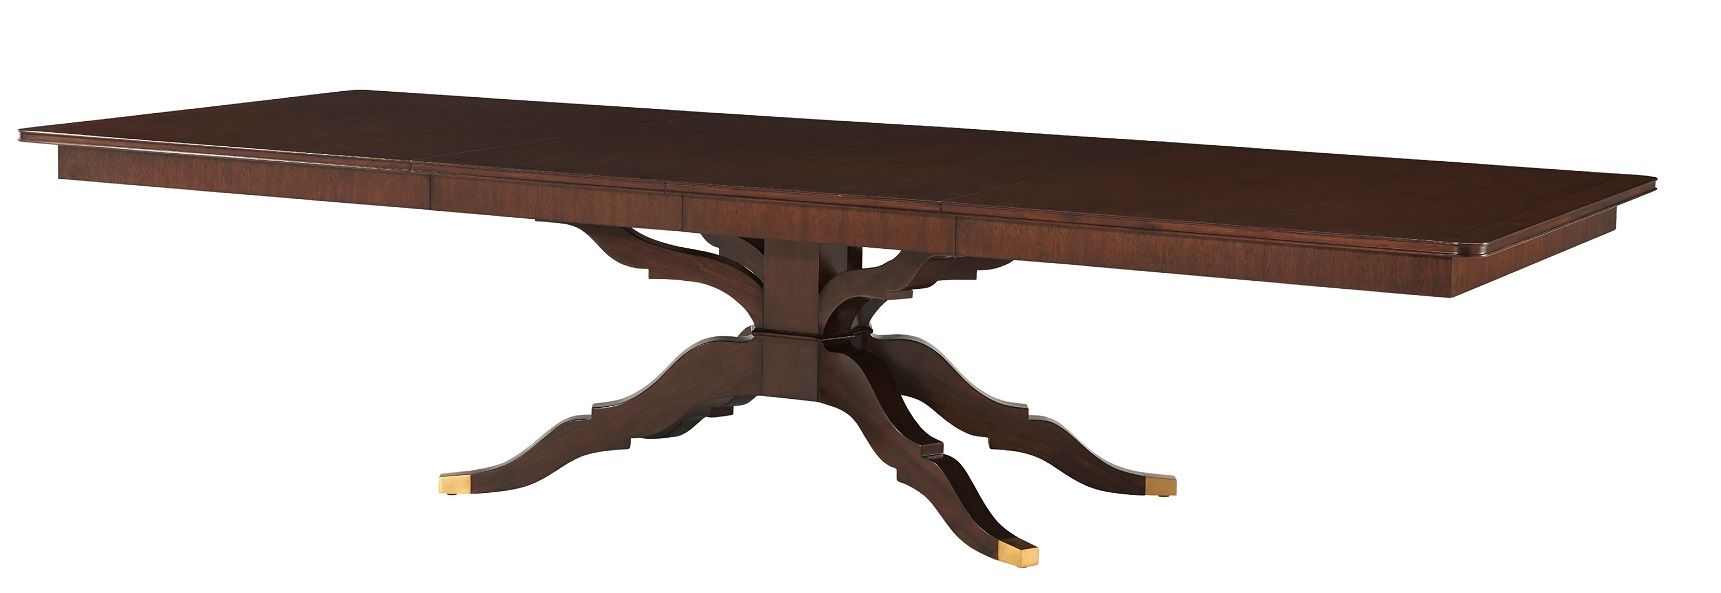 an attention-grabbing dining table with unique carved legs and brass accents